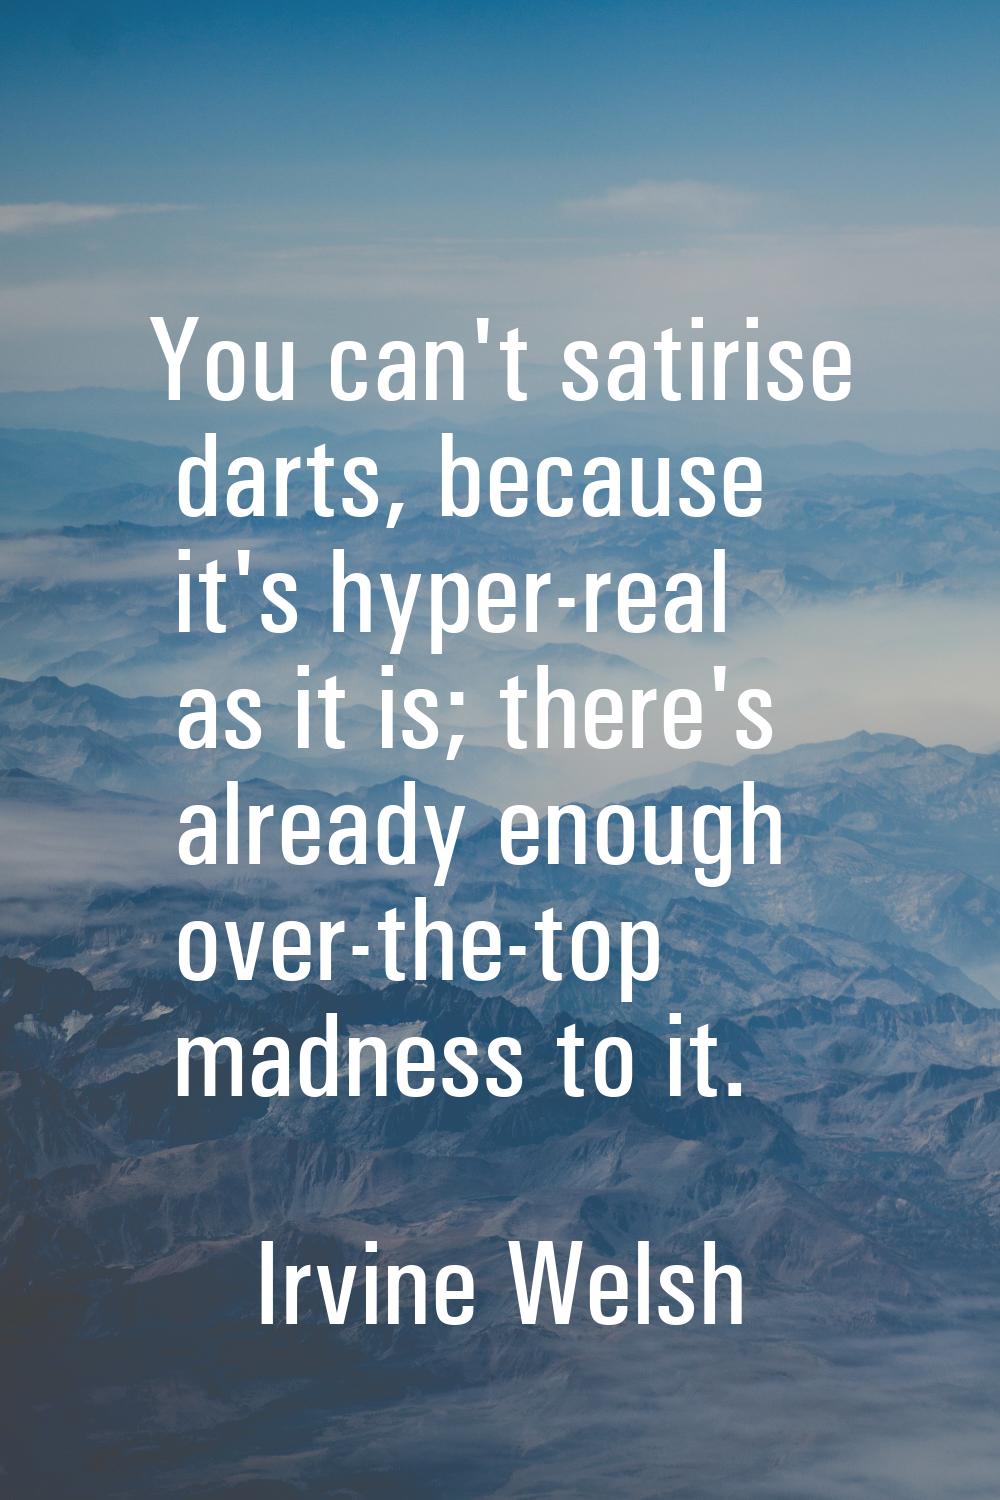 You can't satirise darts, because it's hyper-real as it is; there's already enough over-the-top mad